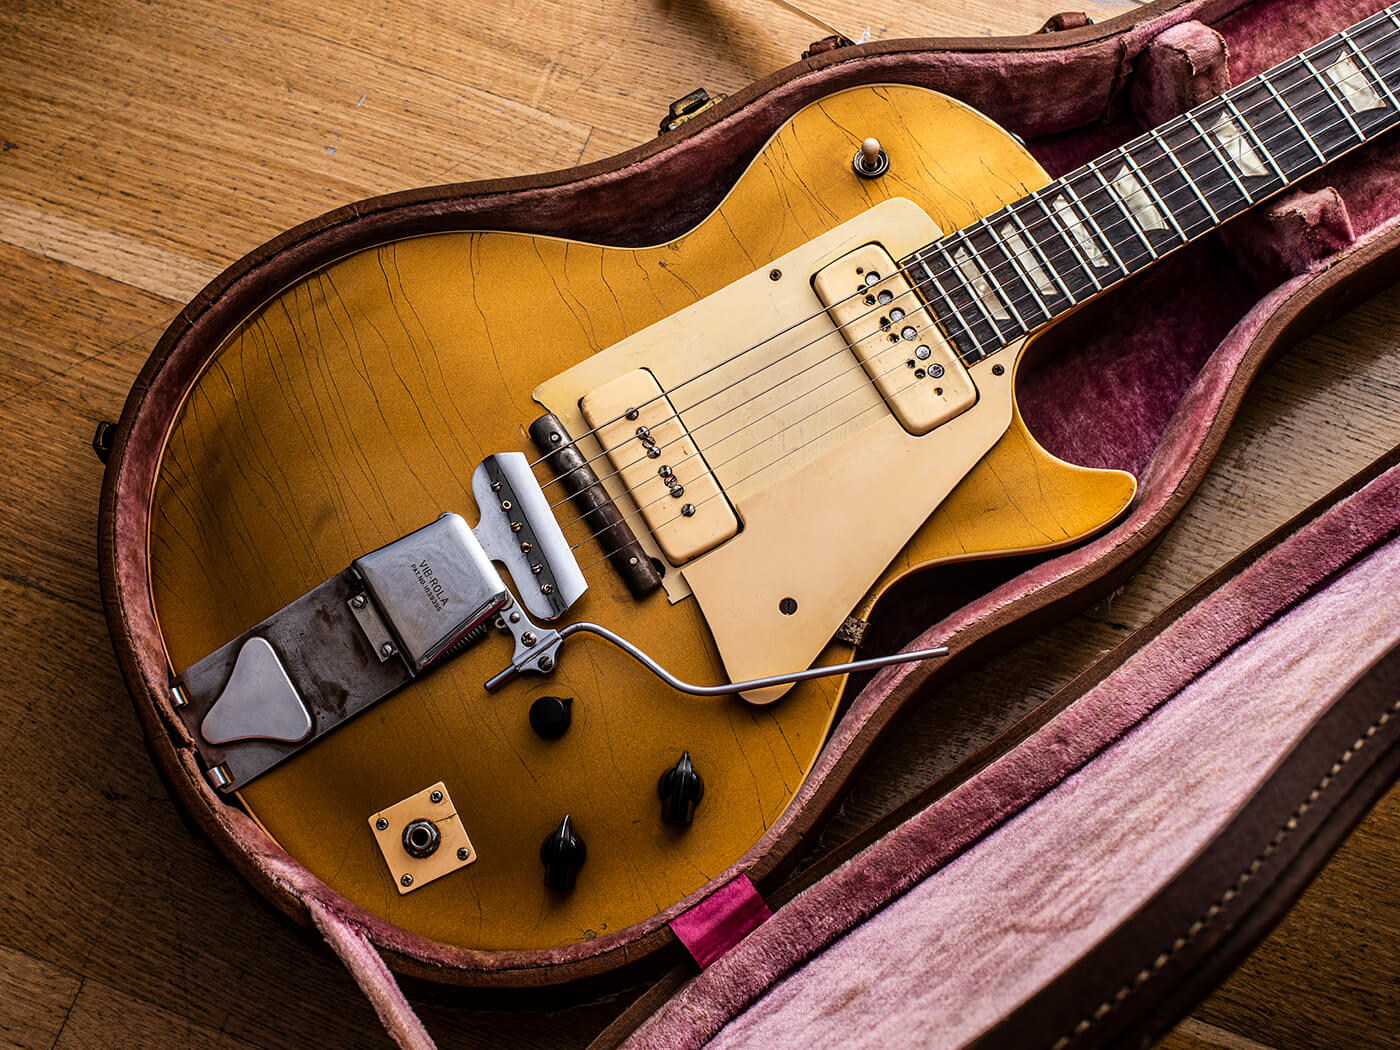 The first Les Paul